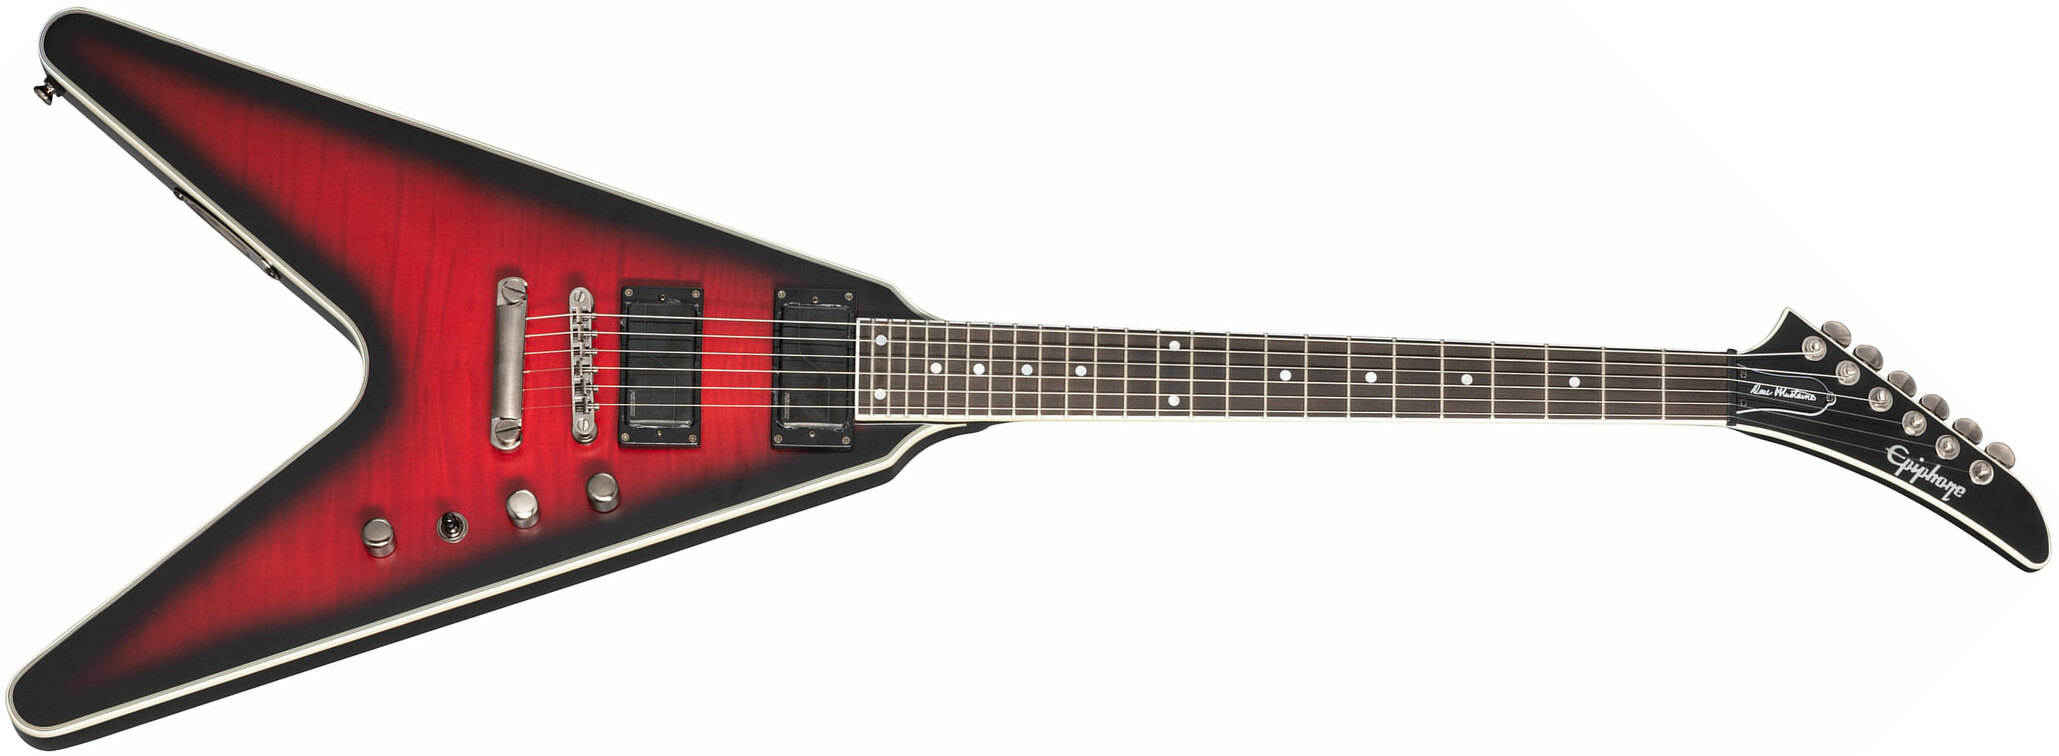 Epiphone Dave Mustaine Flying V Prophecy 2h Fishman Fluence Ht Eb - Aged Dark Red Burst - Metal electric guitar - Main picture